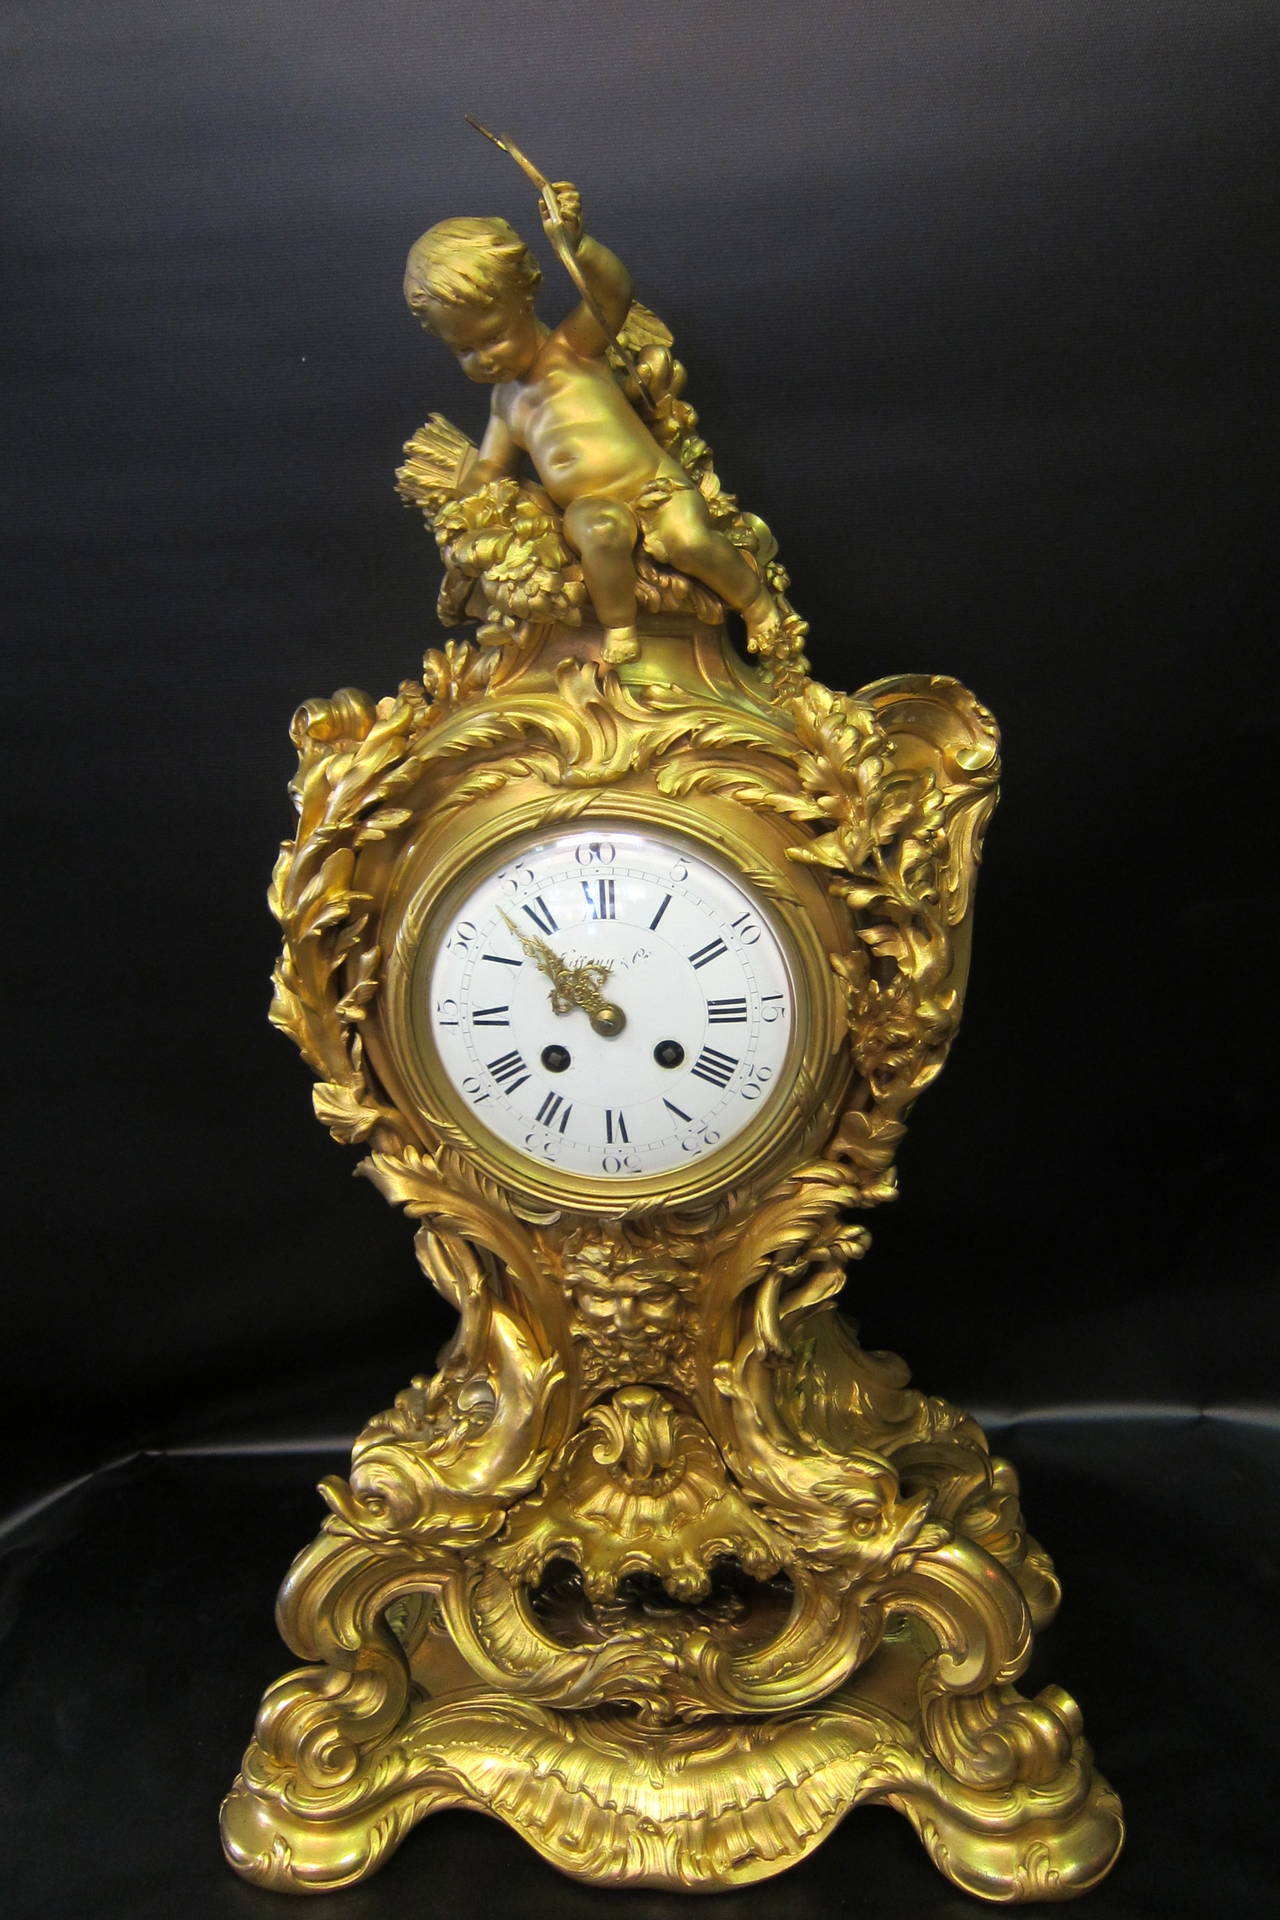 This impressive example of an early 20th century French Rococo palace size clock set is designed by the prestigious E. Collin & Cie of Paris. The sculpted ensemble is detailed with crisp elaborate scrolling that is accented with a full figure cupid